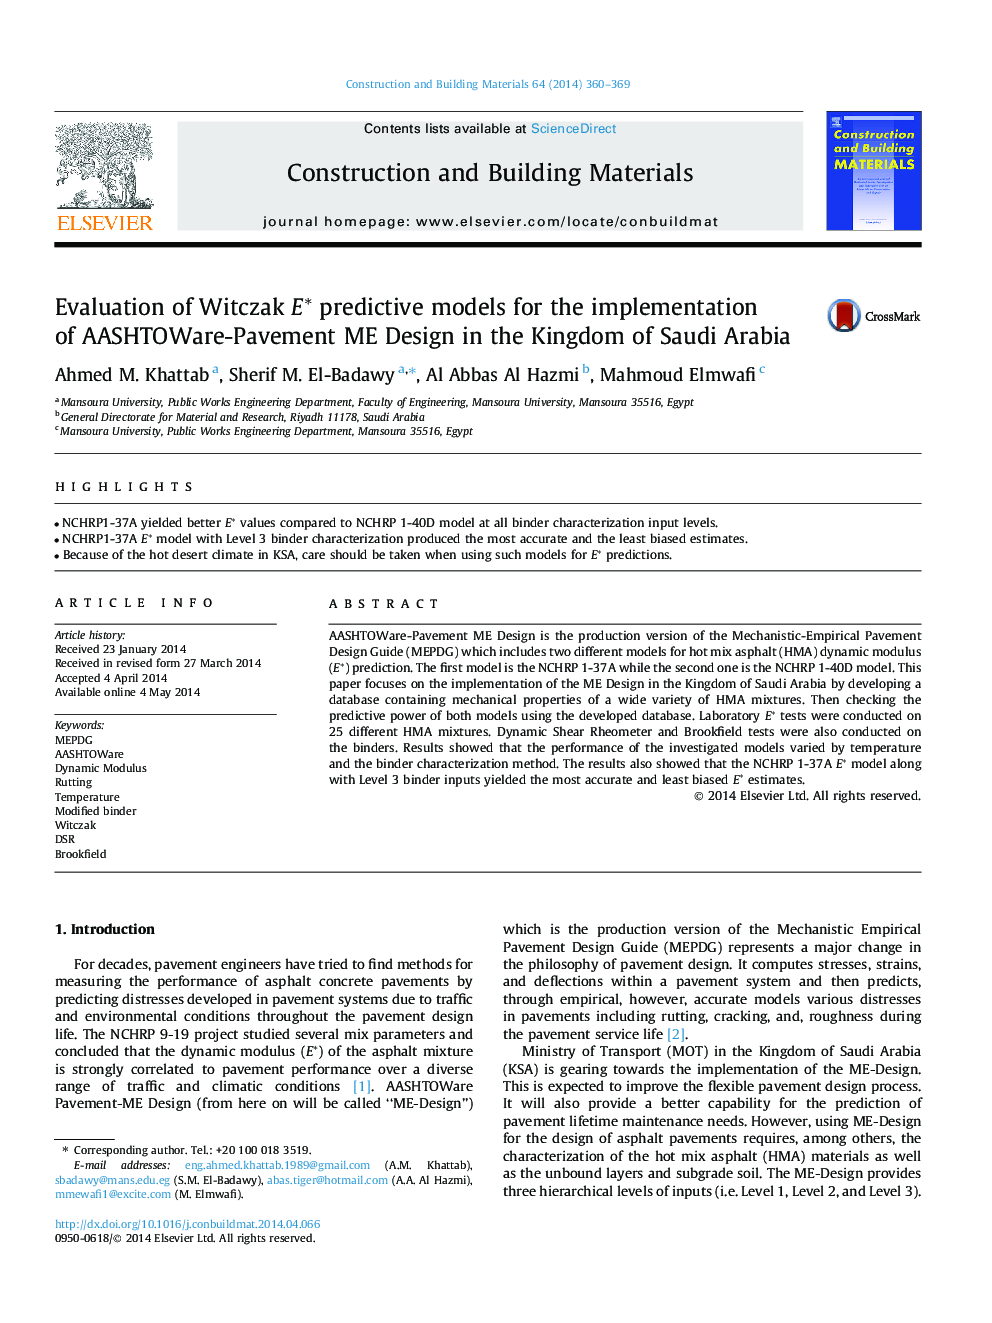 Evaluation of Witczak E* predictive models for the implementation of AASHTOWare-Pavement ME Design in the Kingdom of Saudi Arabia